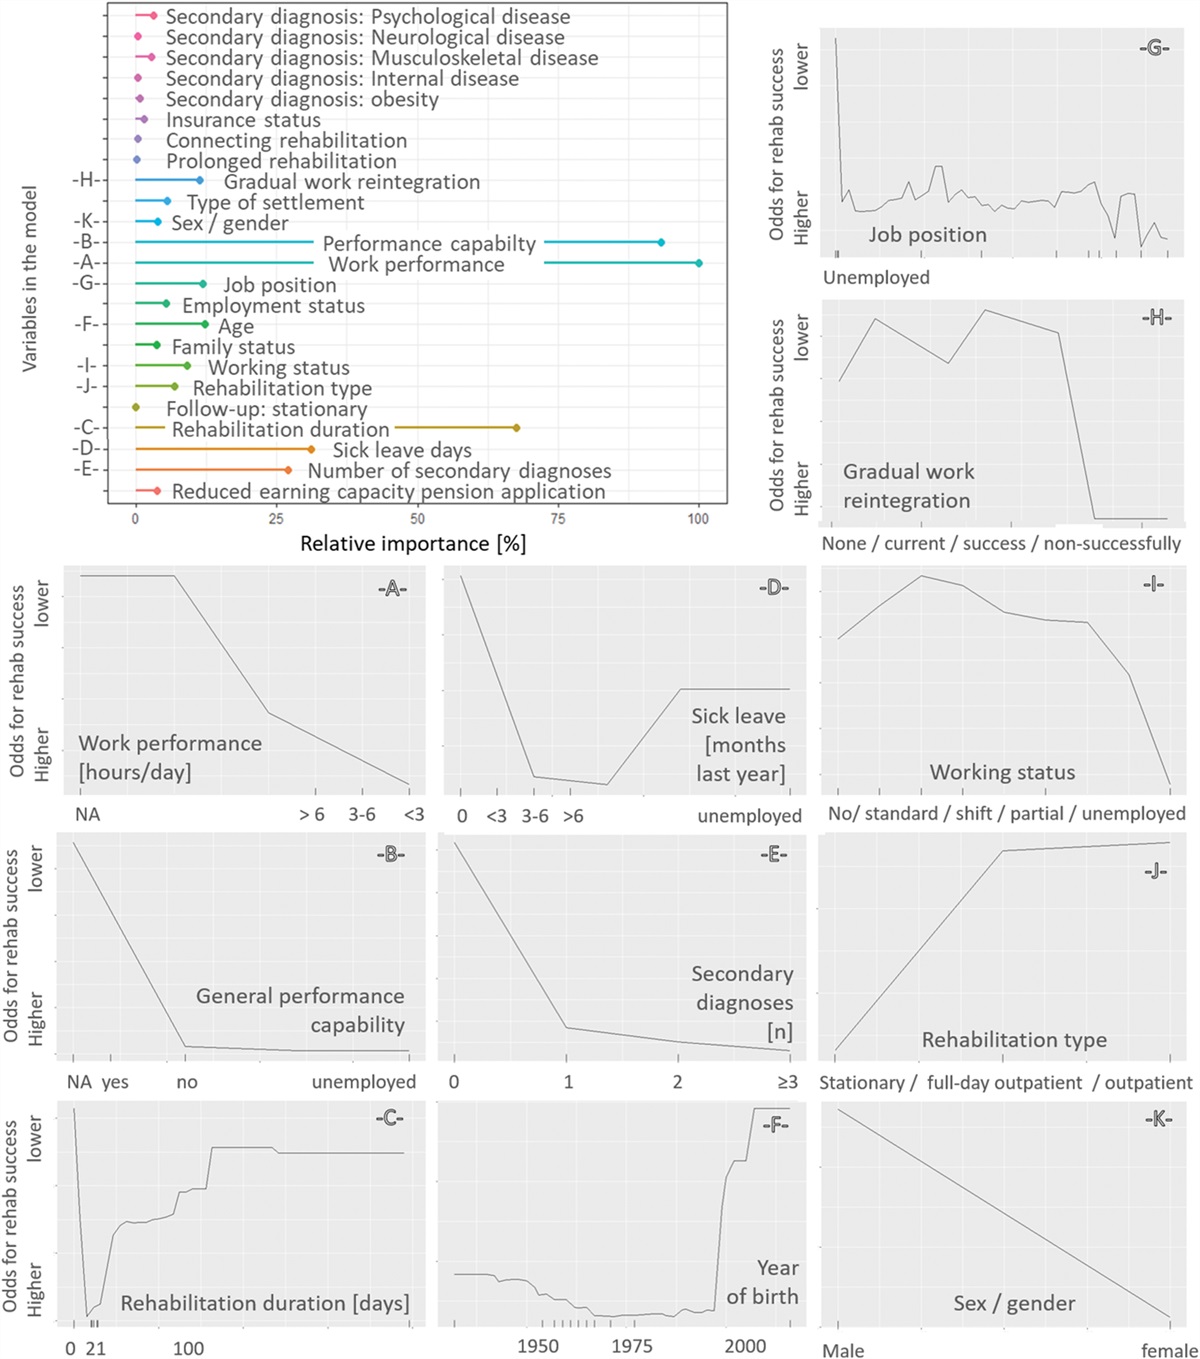 Machine learning-based identification of determinants for rehabilitation success and future healthcare use prevention in patients with high-grade, chronic, nonspecific low back pain: an individual data 7-year follow-up analysis on 154,167 individuals